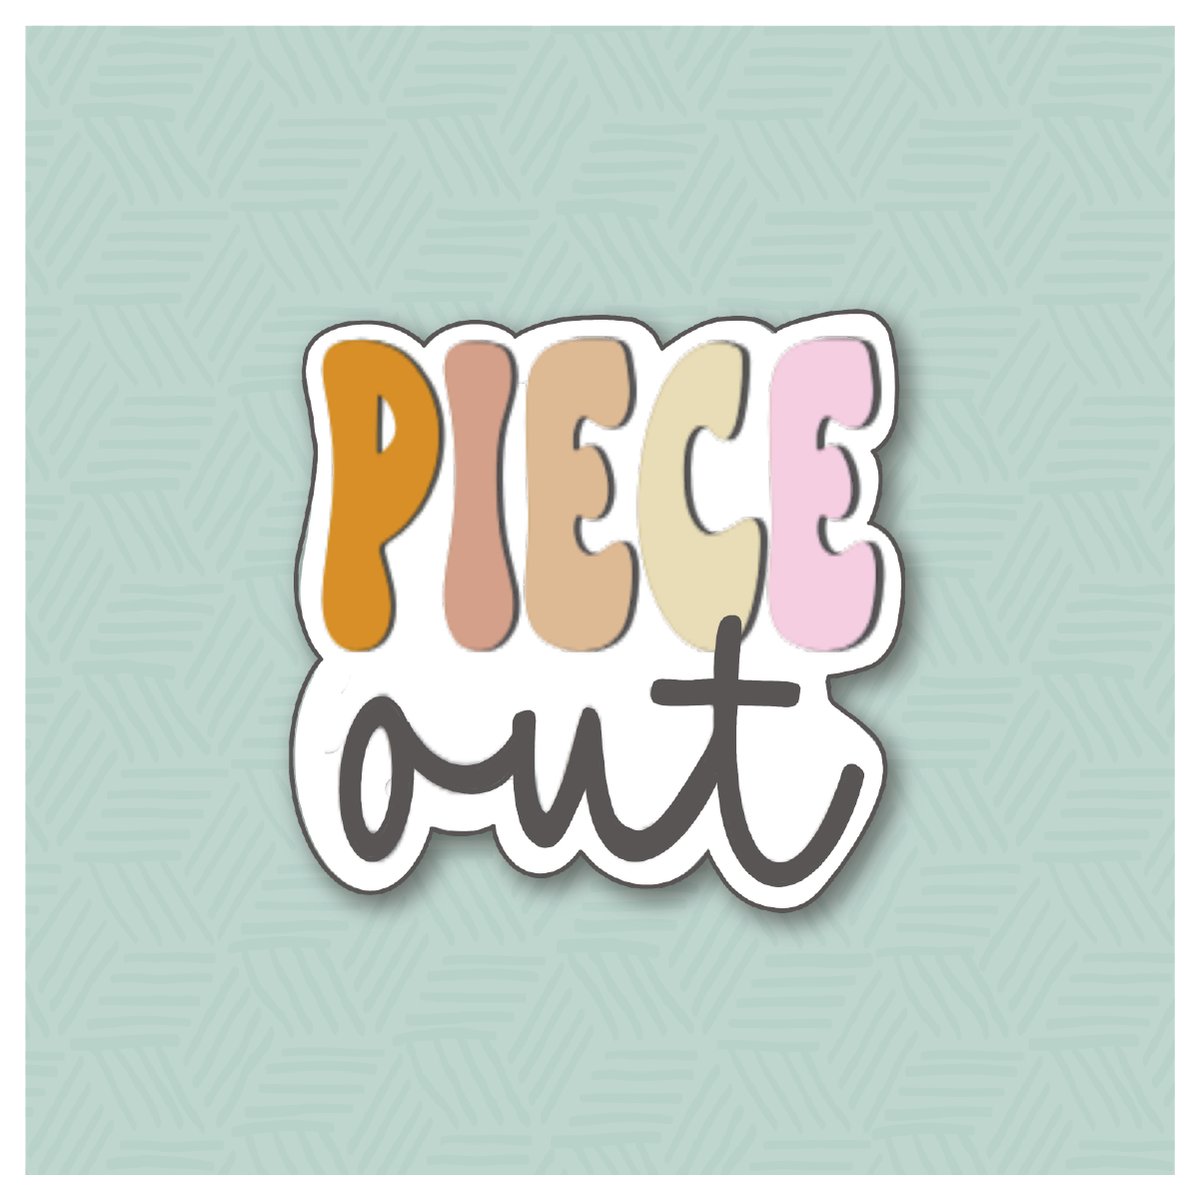 Piece Out Hand Lettered Cookie Cutter